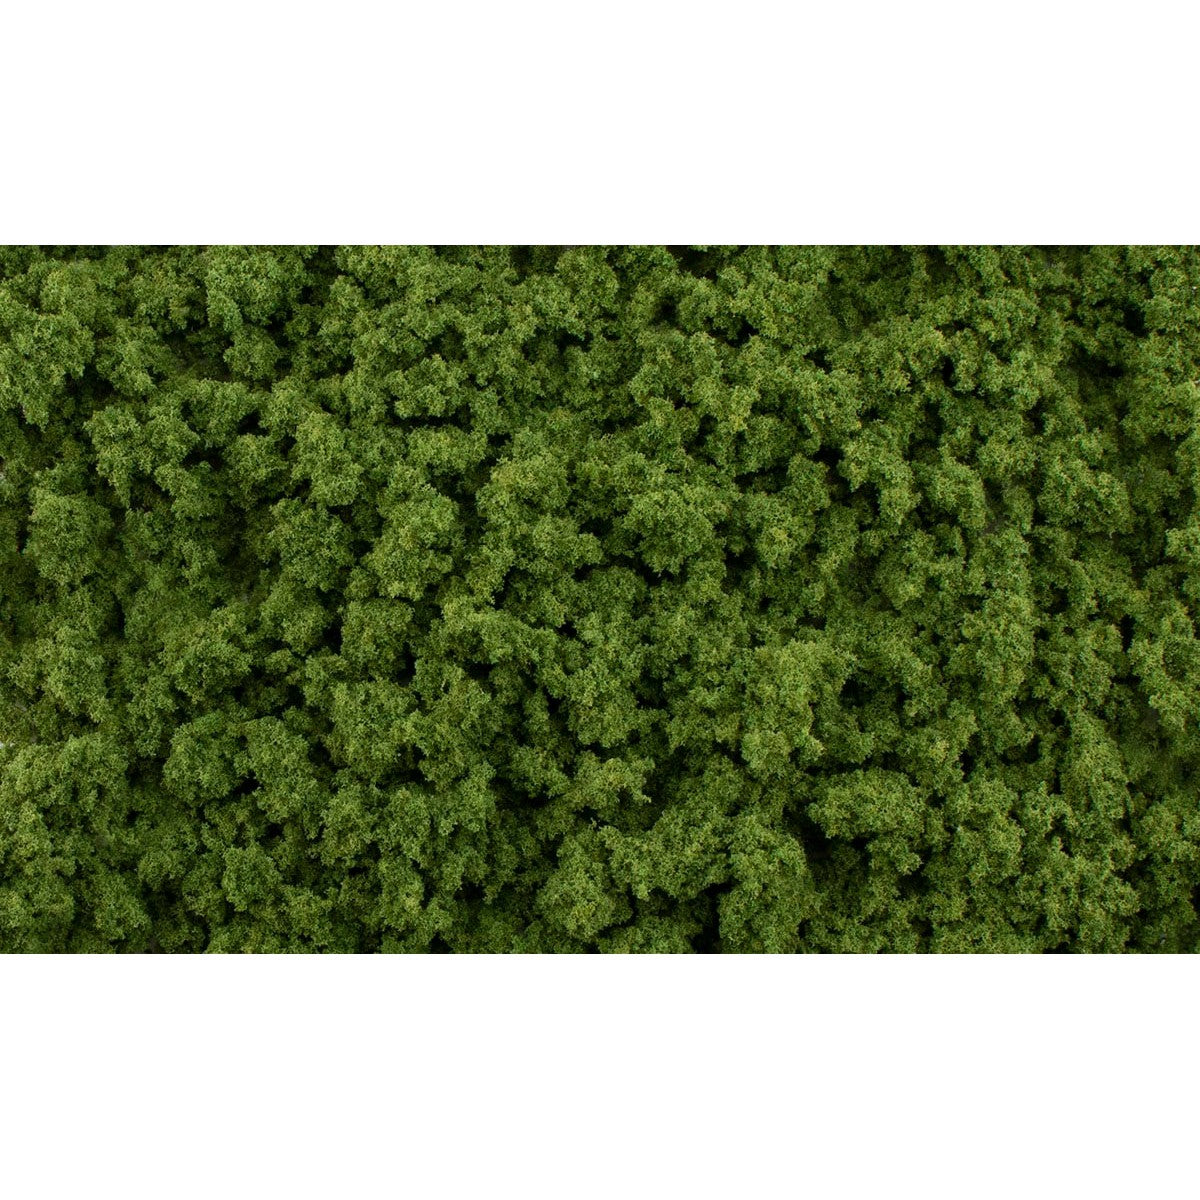 Light Green Foliage Clumps - Light Green Foliage Clumps make it easy to add bushes, shrubbery and trees to your terrain feature, miniature base or gaming board